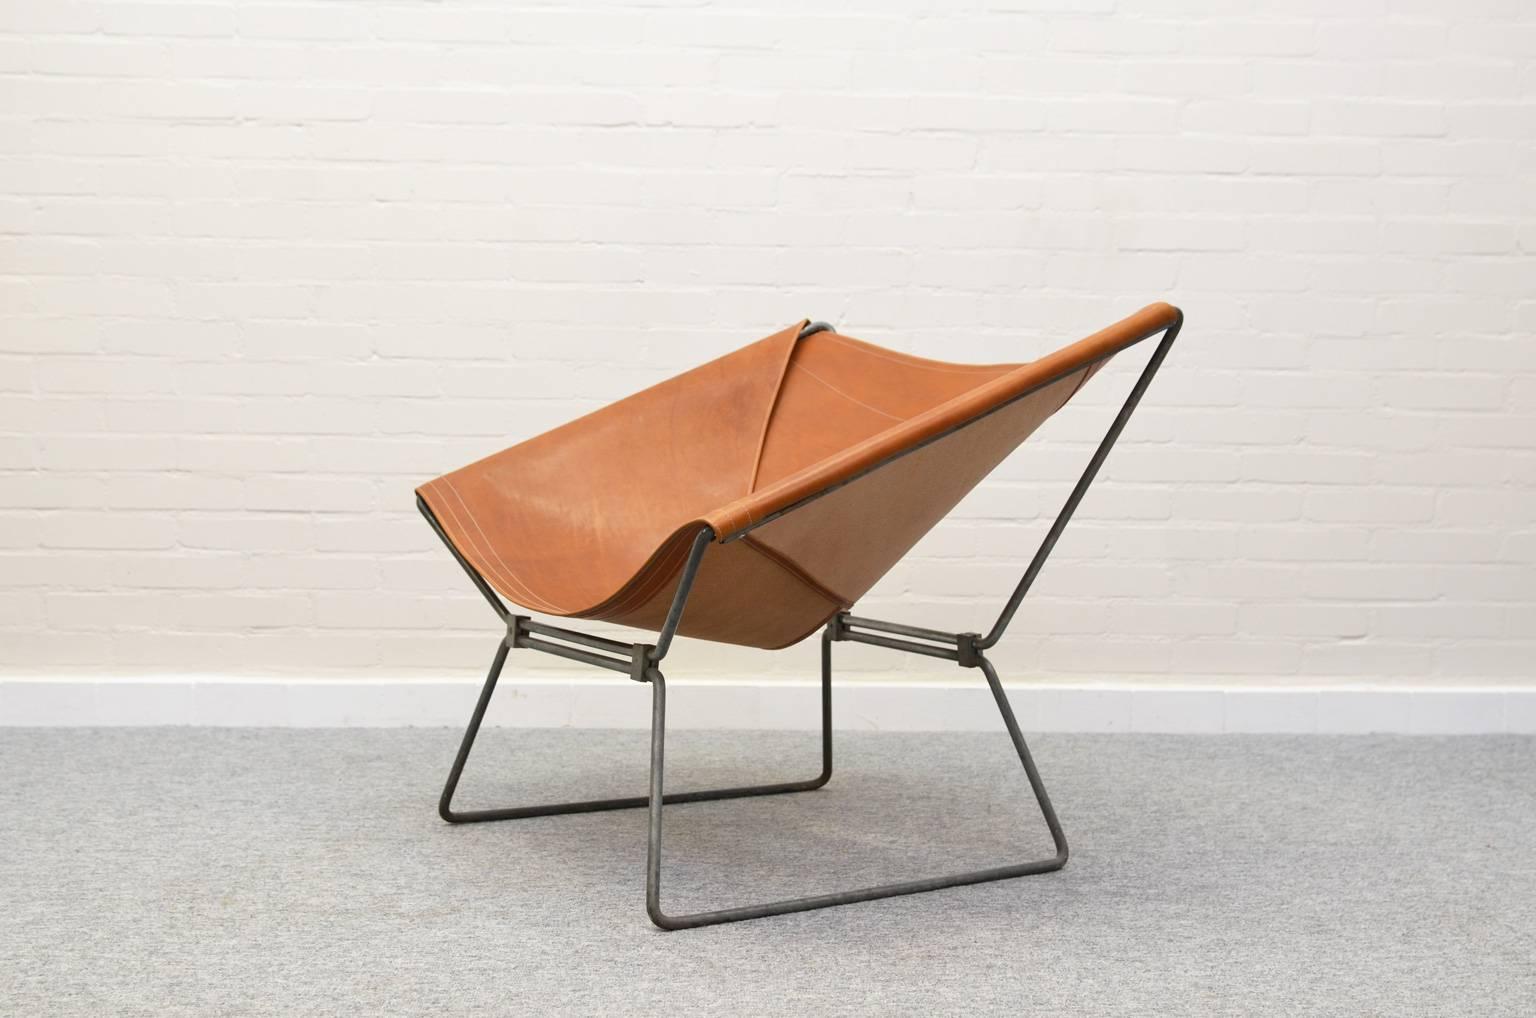 This chair (model AP14) was designed by French designer Pierre Paulin in 1954 for A. Polak, a Dutch furniture manufacturer. The frame consists of two pieces of tubular steel, hold together by steel clips. The original seating is replaced by